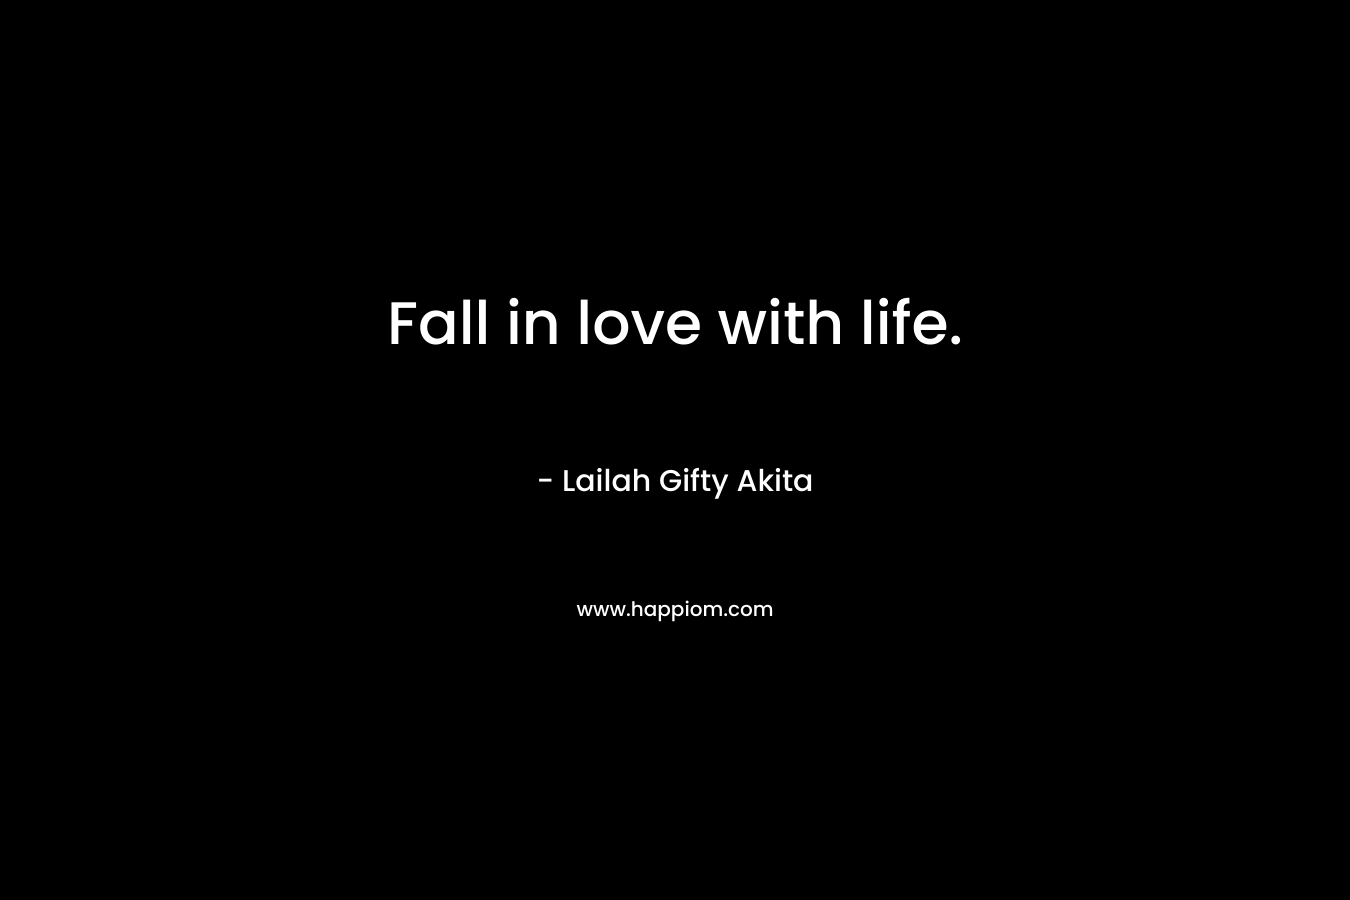 Fall in love with life.